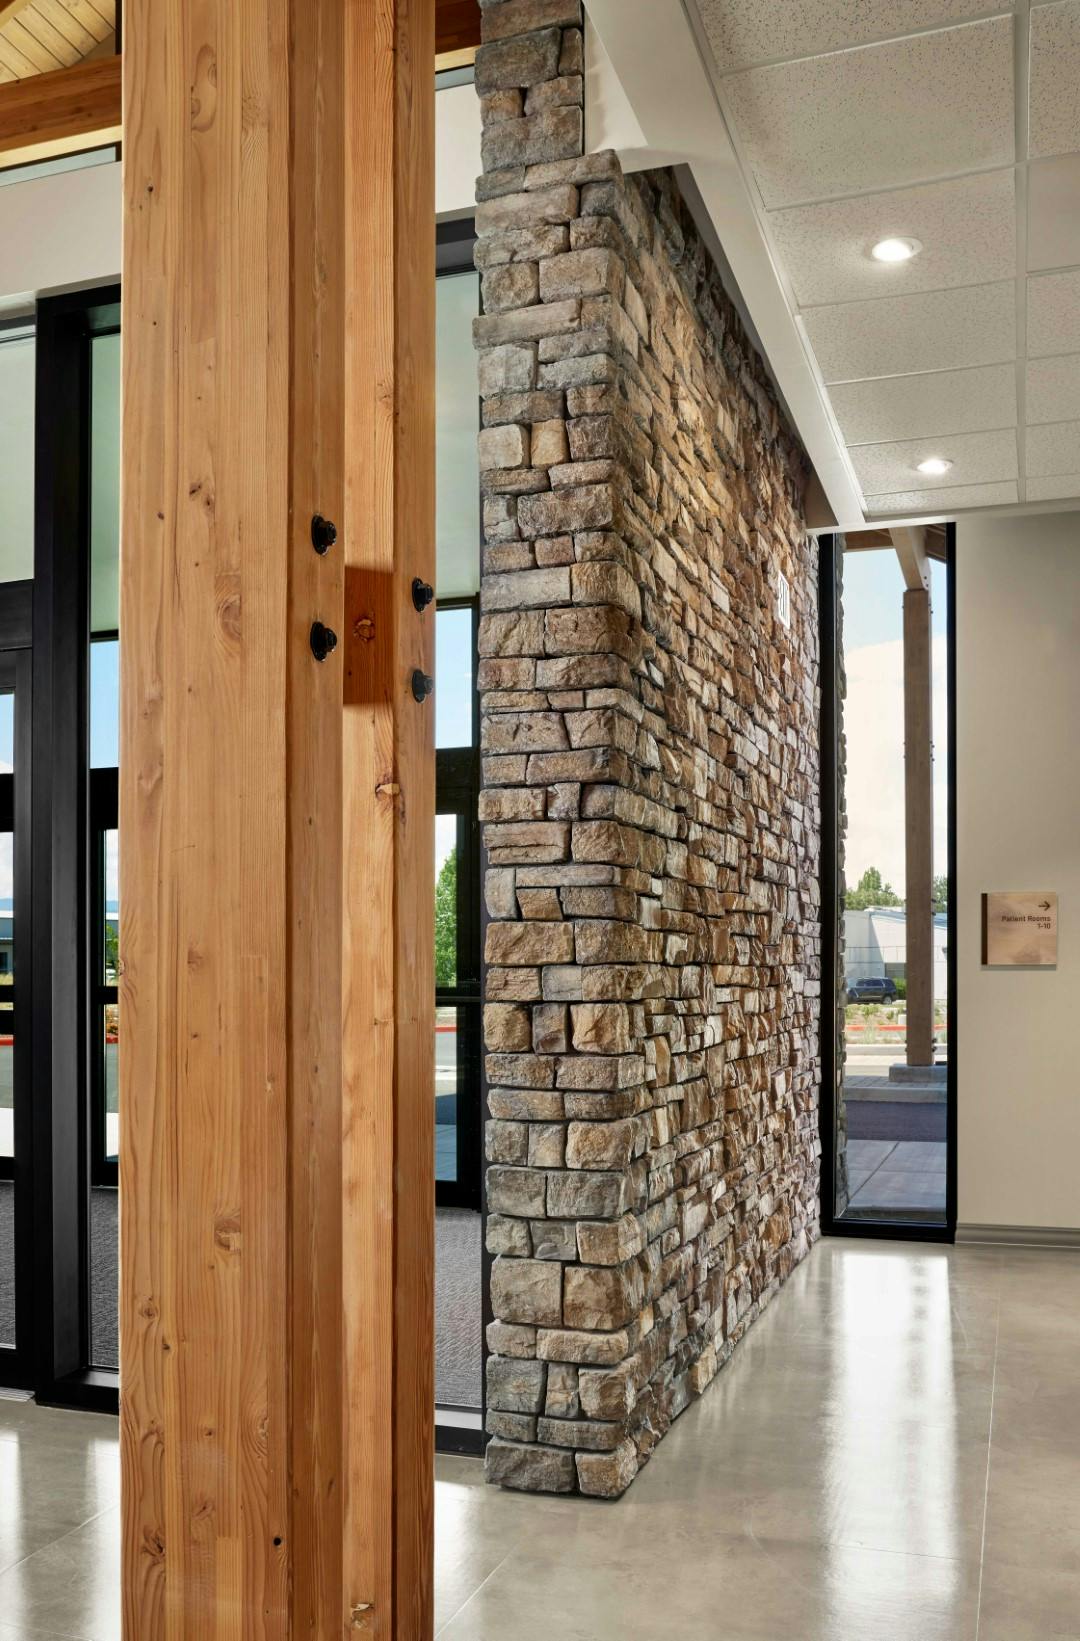 Example of the wood and stone textures present in the lobby of the OOC ambulatory surgery center.